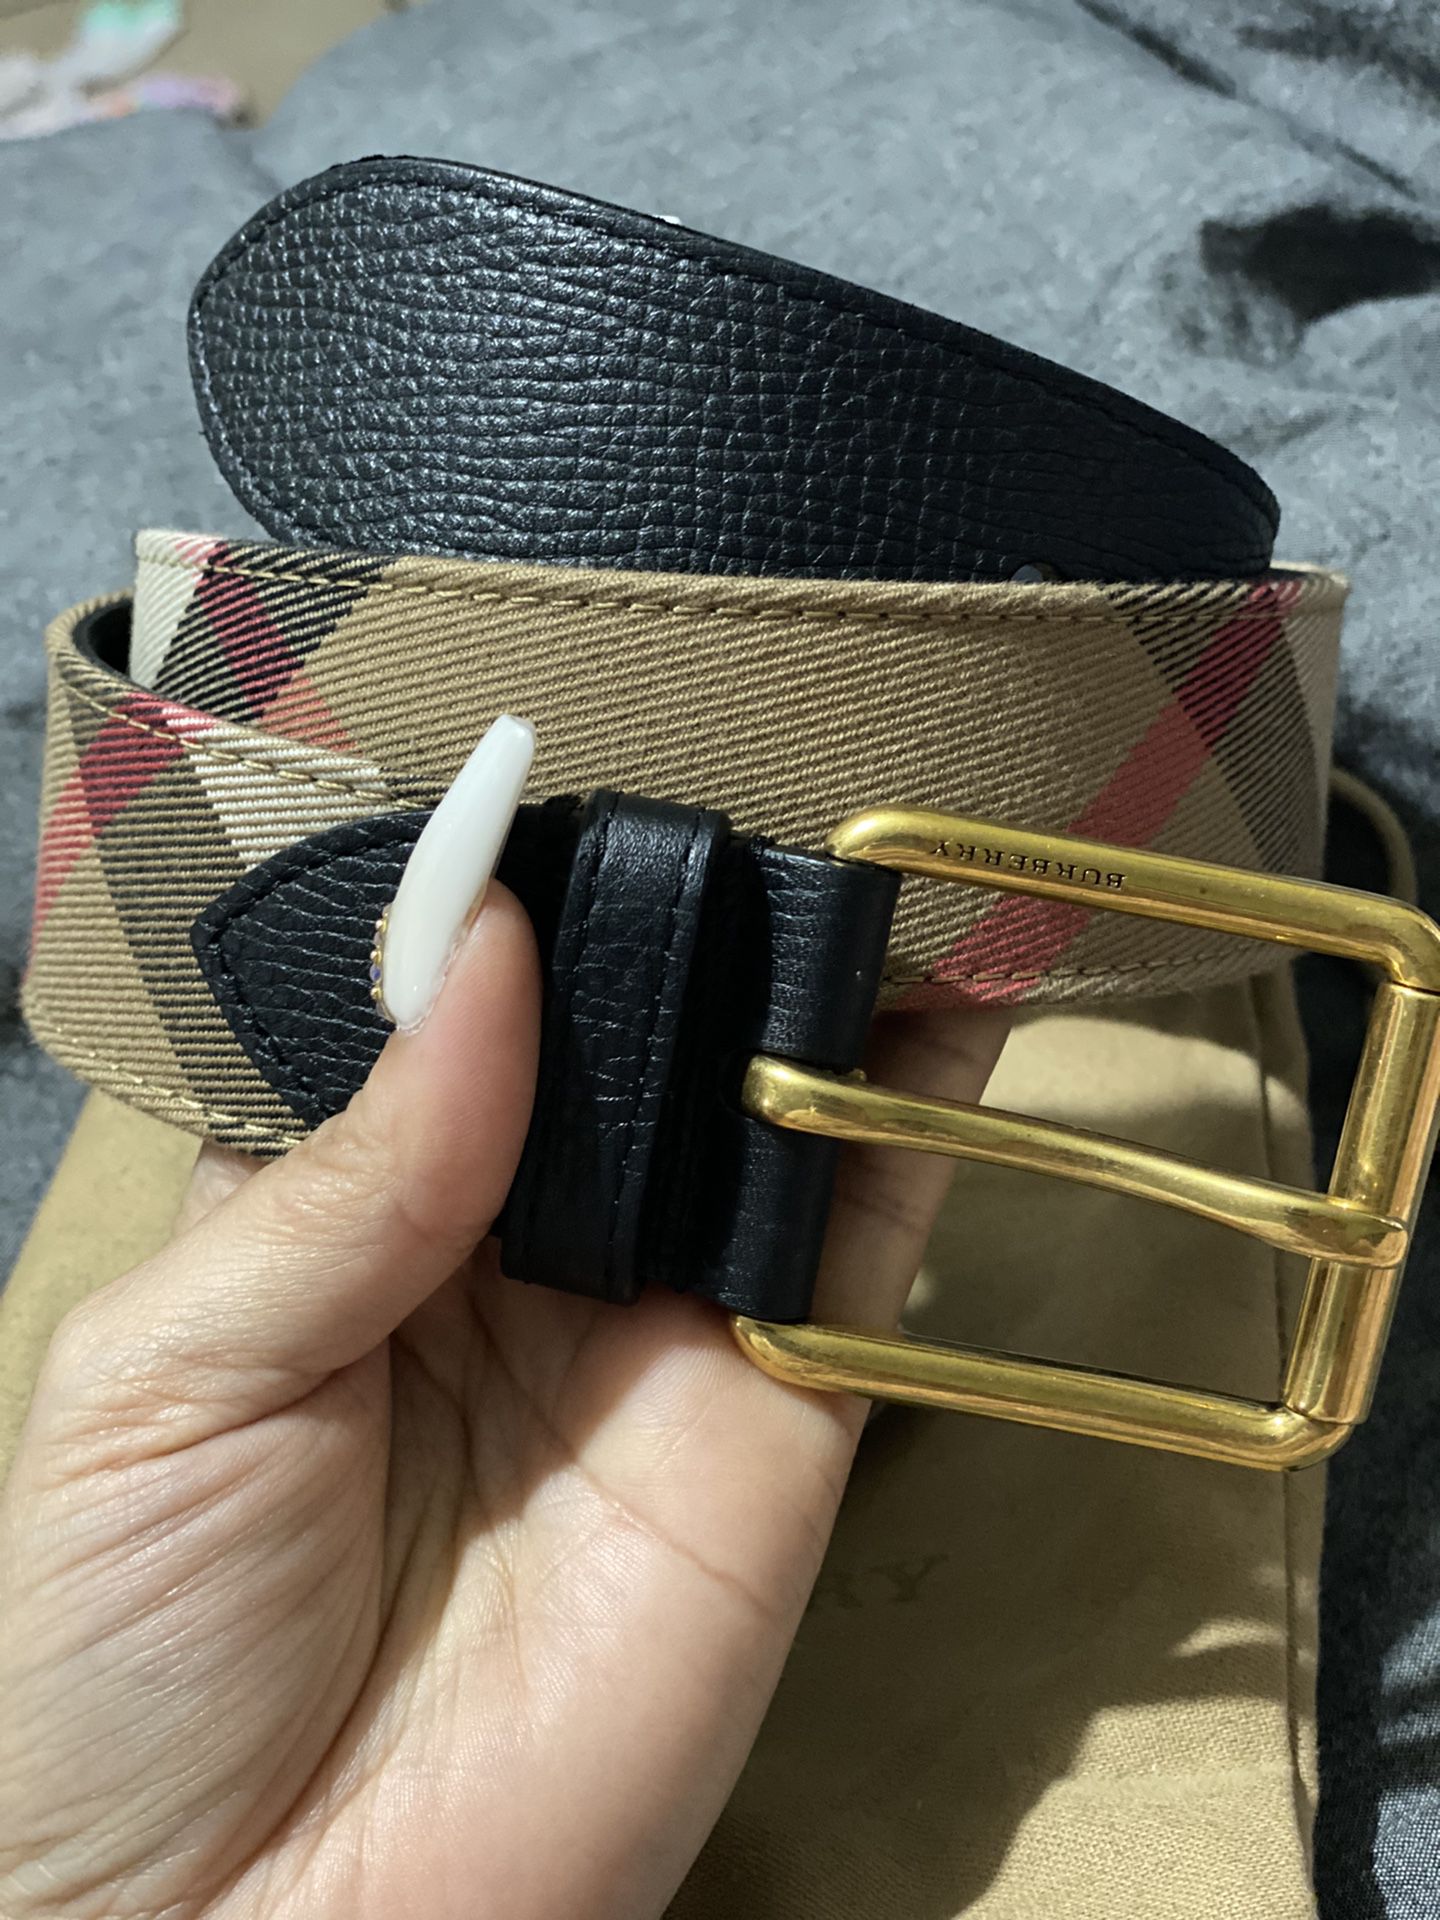 Burberry Belt for Sale in South Gate, CA - OfferUp